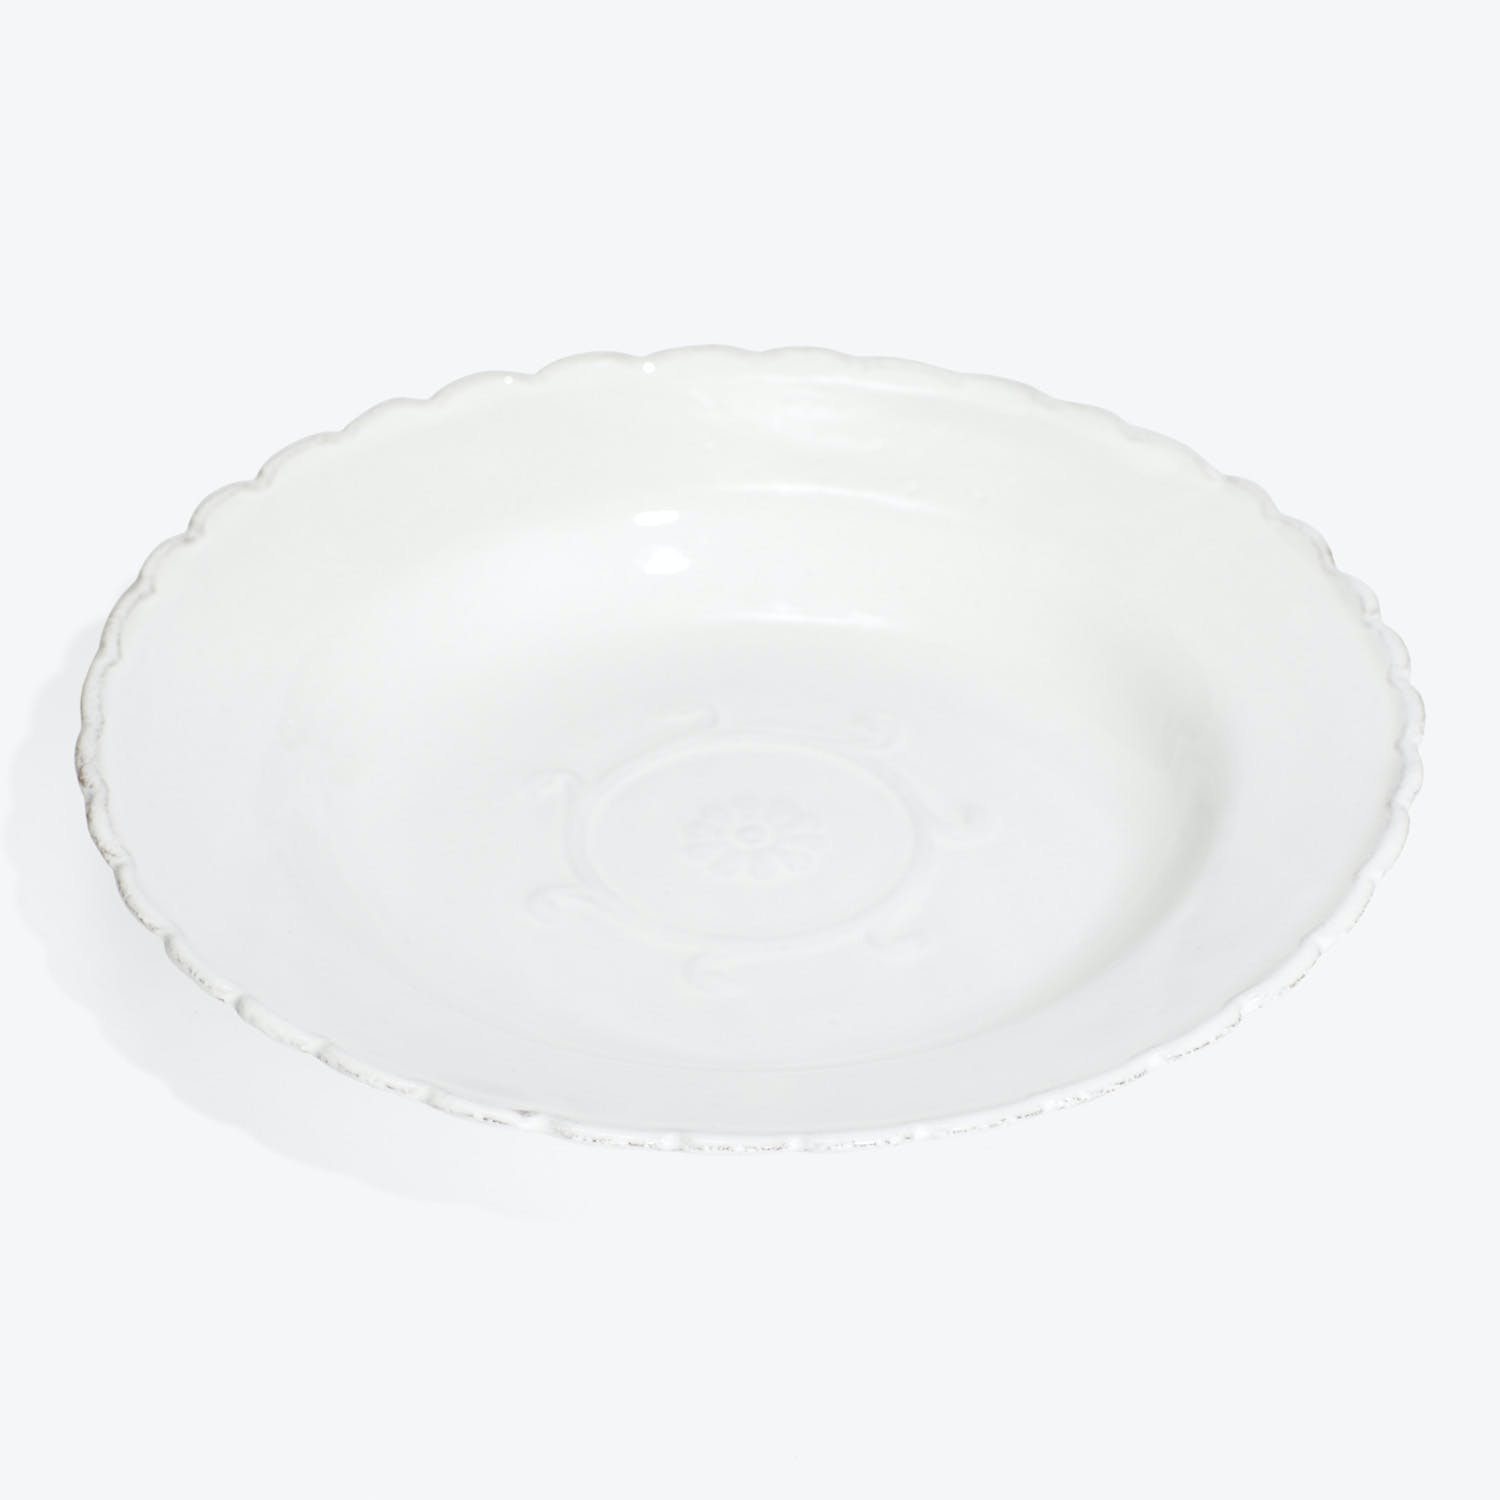 White ceramic plate with scalloped edge and embossed floral pattern.